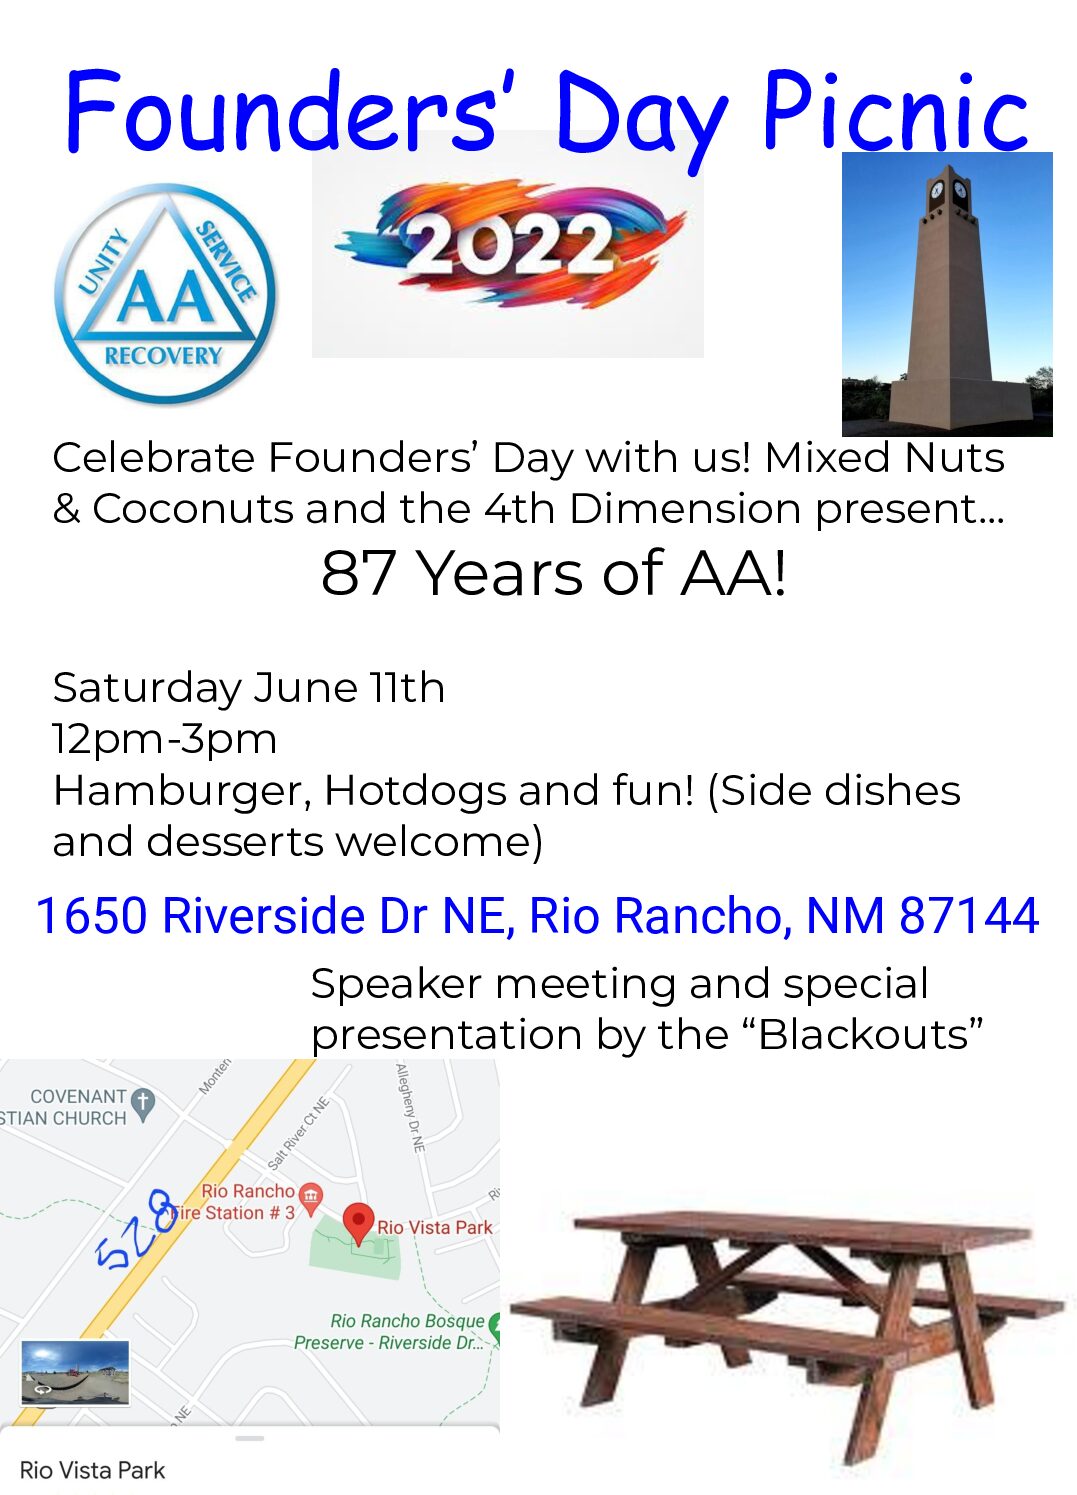 June 11: District 18 Founder’s Day Picnic